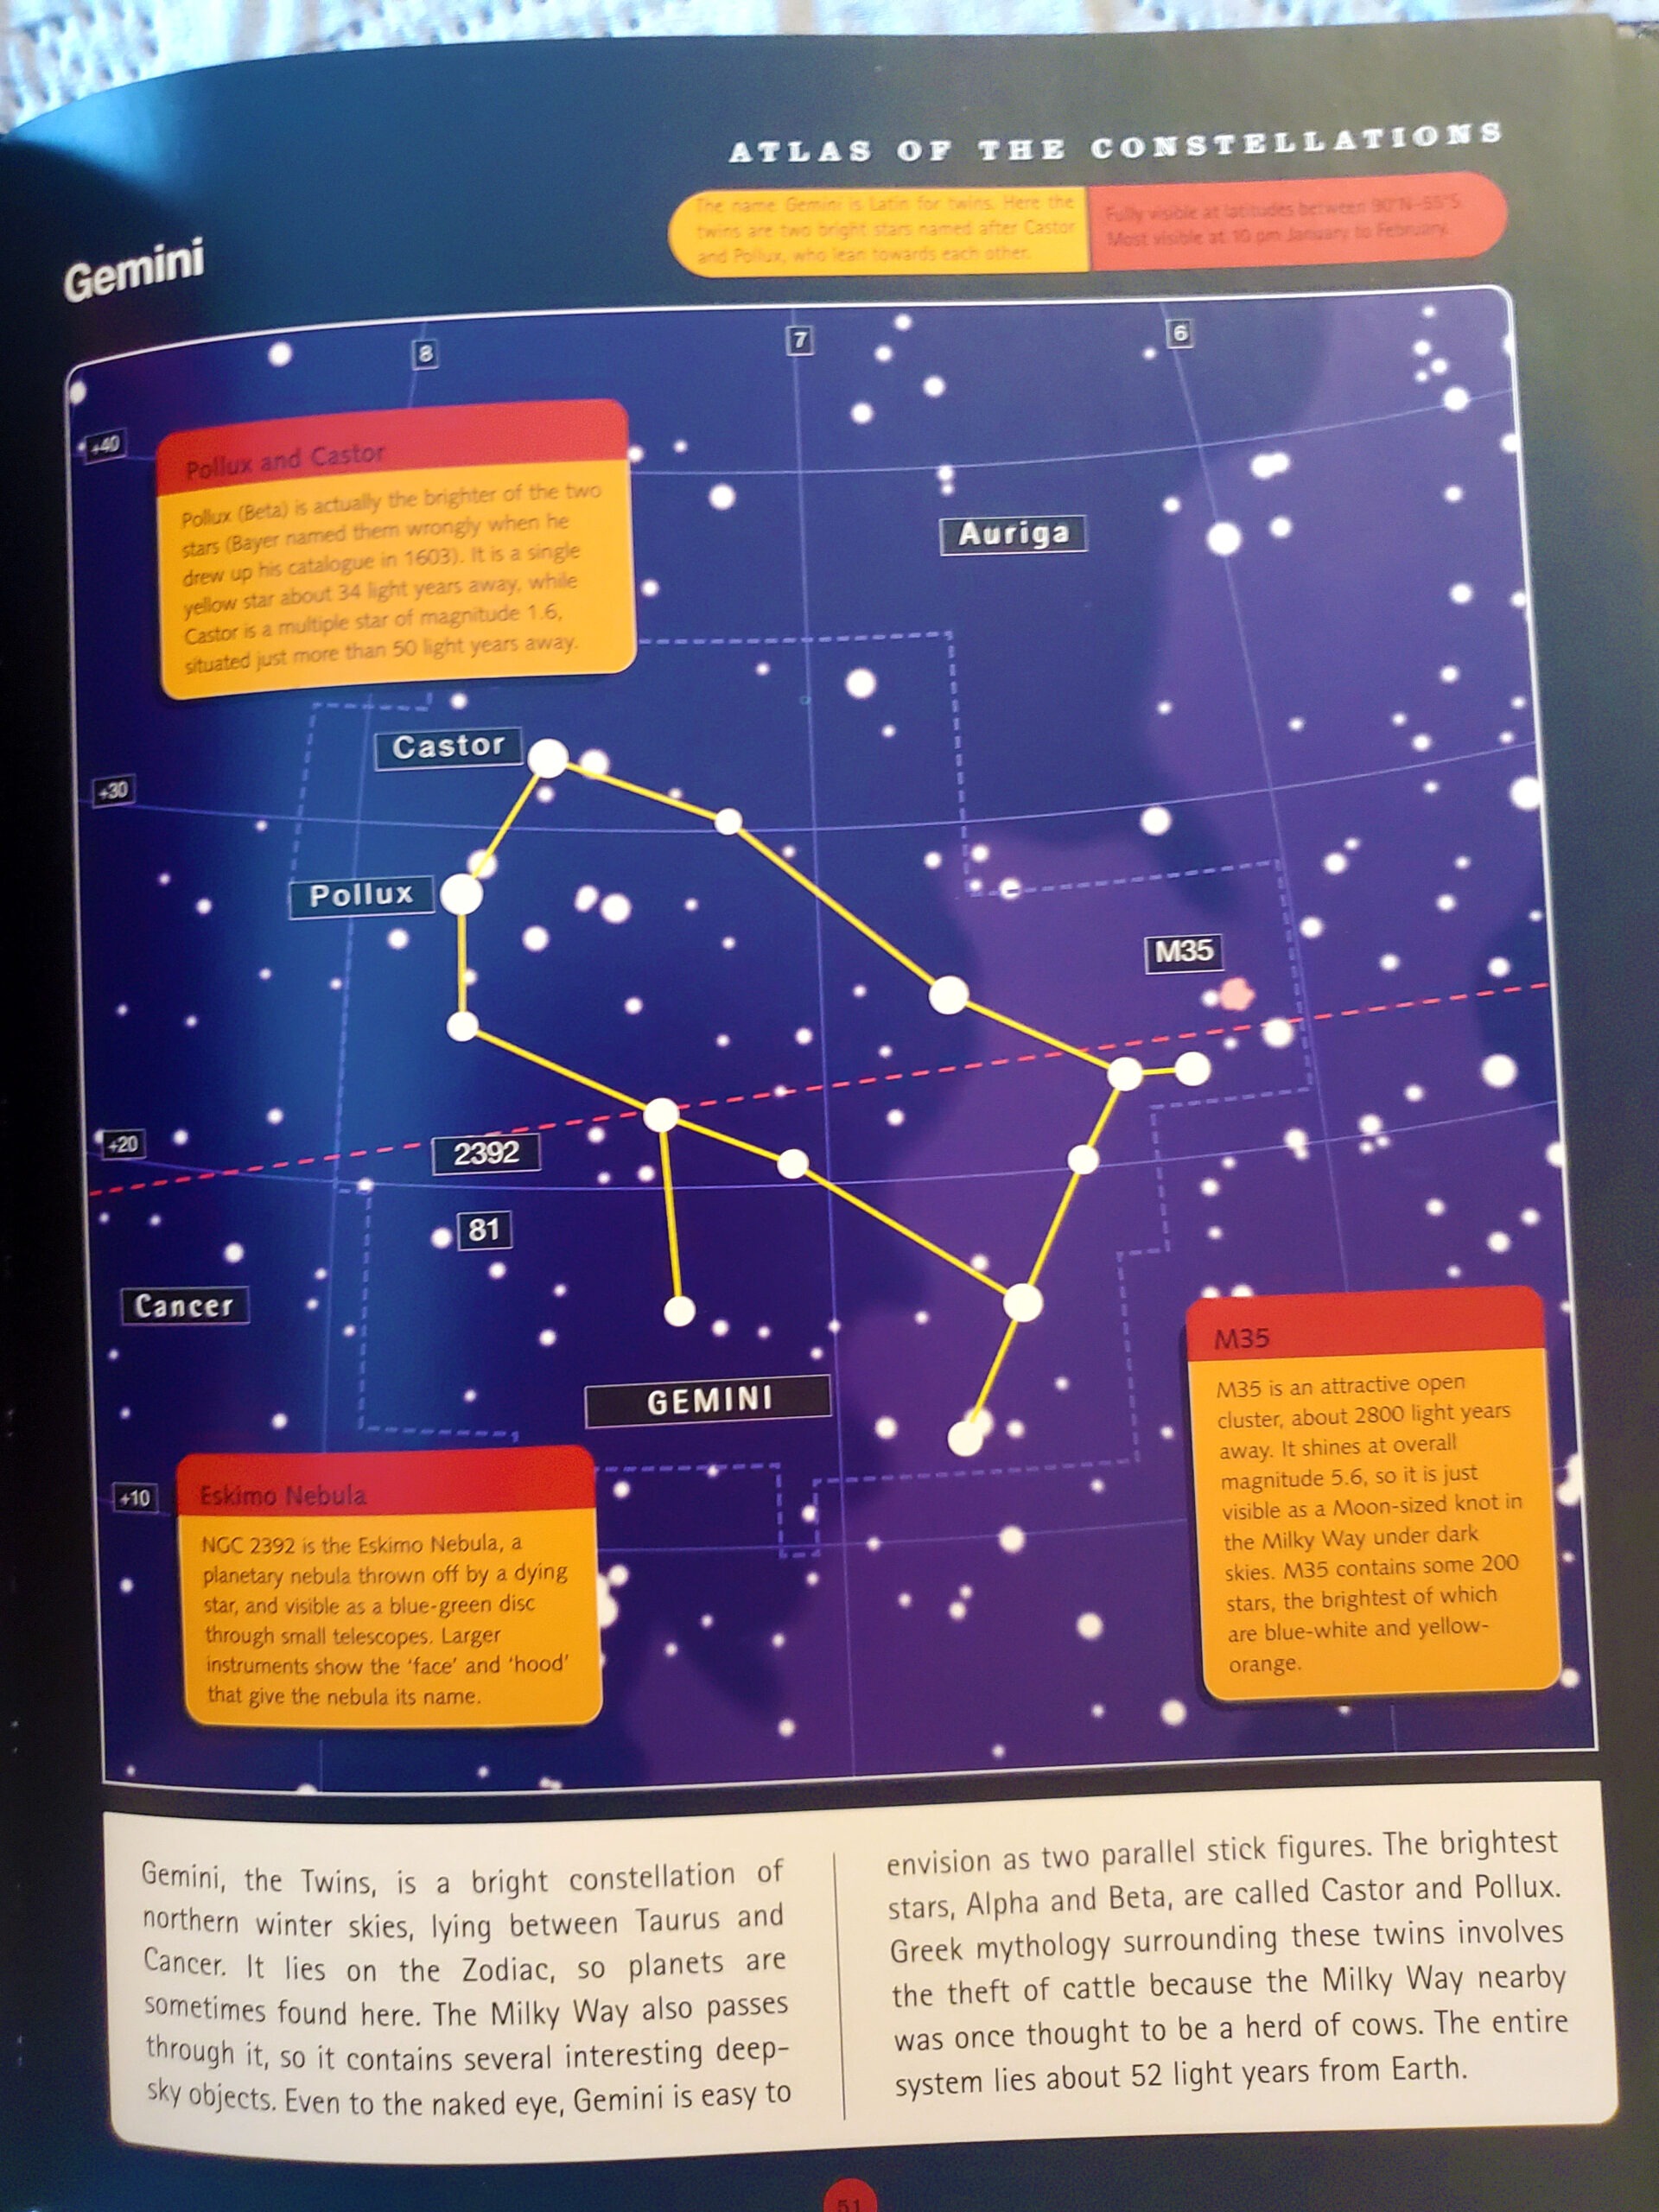 Page from Atlas of the Constellations